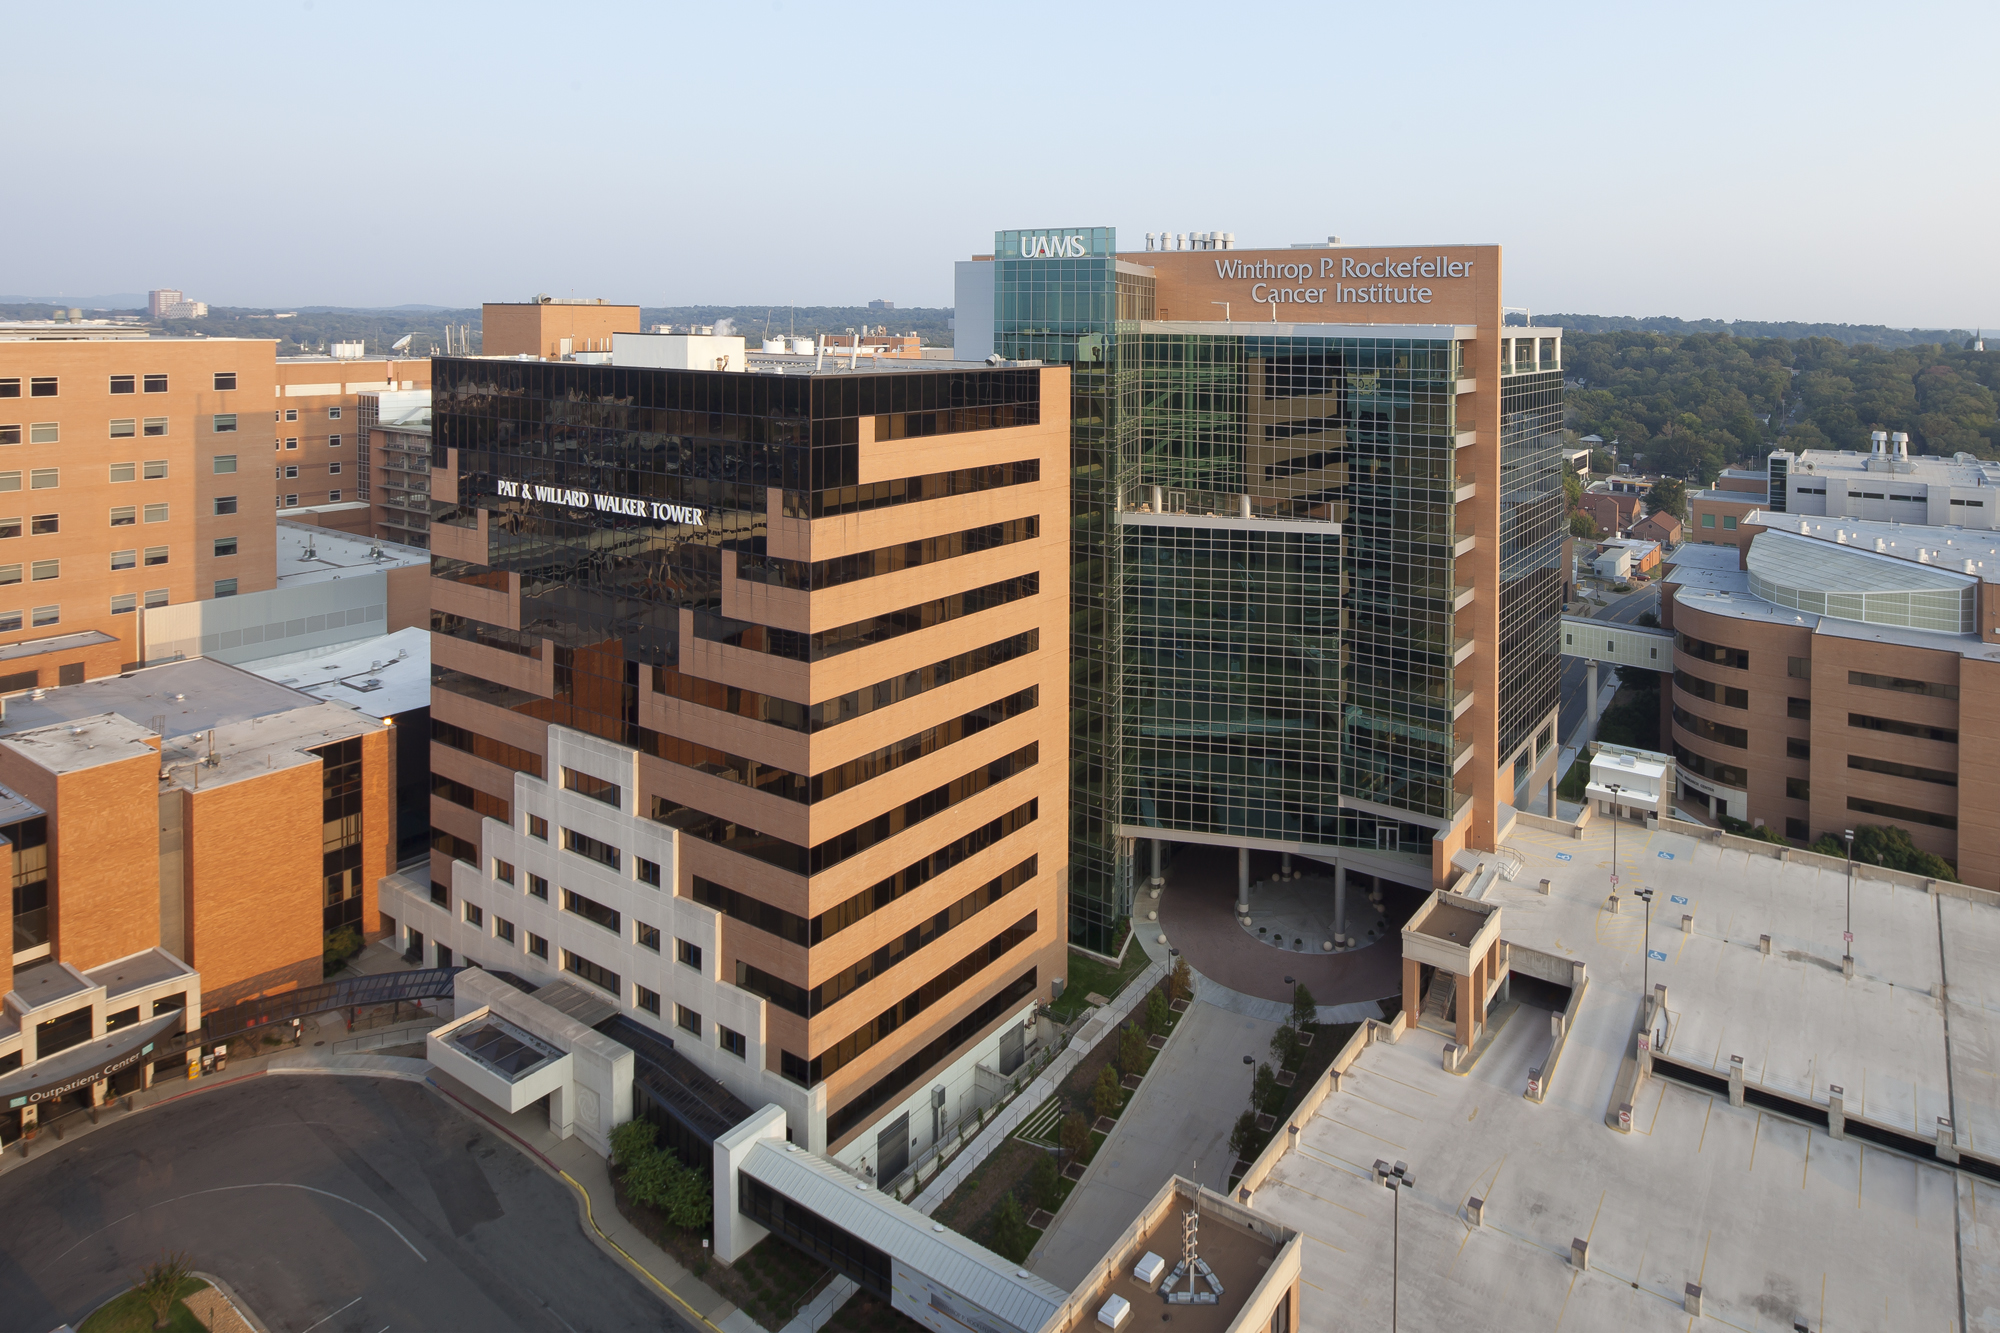 aerial view of the Winthrop J. Rockefeller Cancer Institute